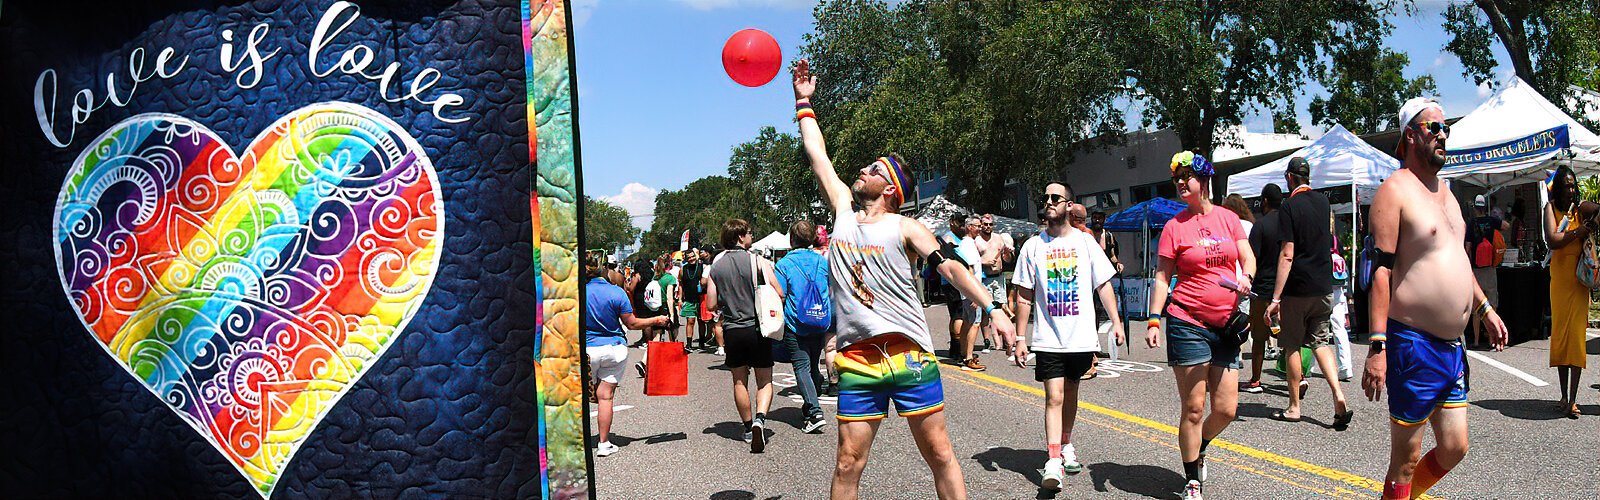 There are good times for everyone at the St Pete Pride street festival, which is packed with vendors, games and performers, and where the "Love is Love" slogan is ubiquitous.